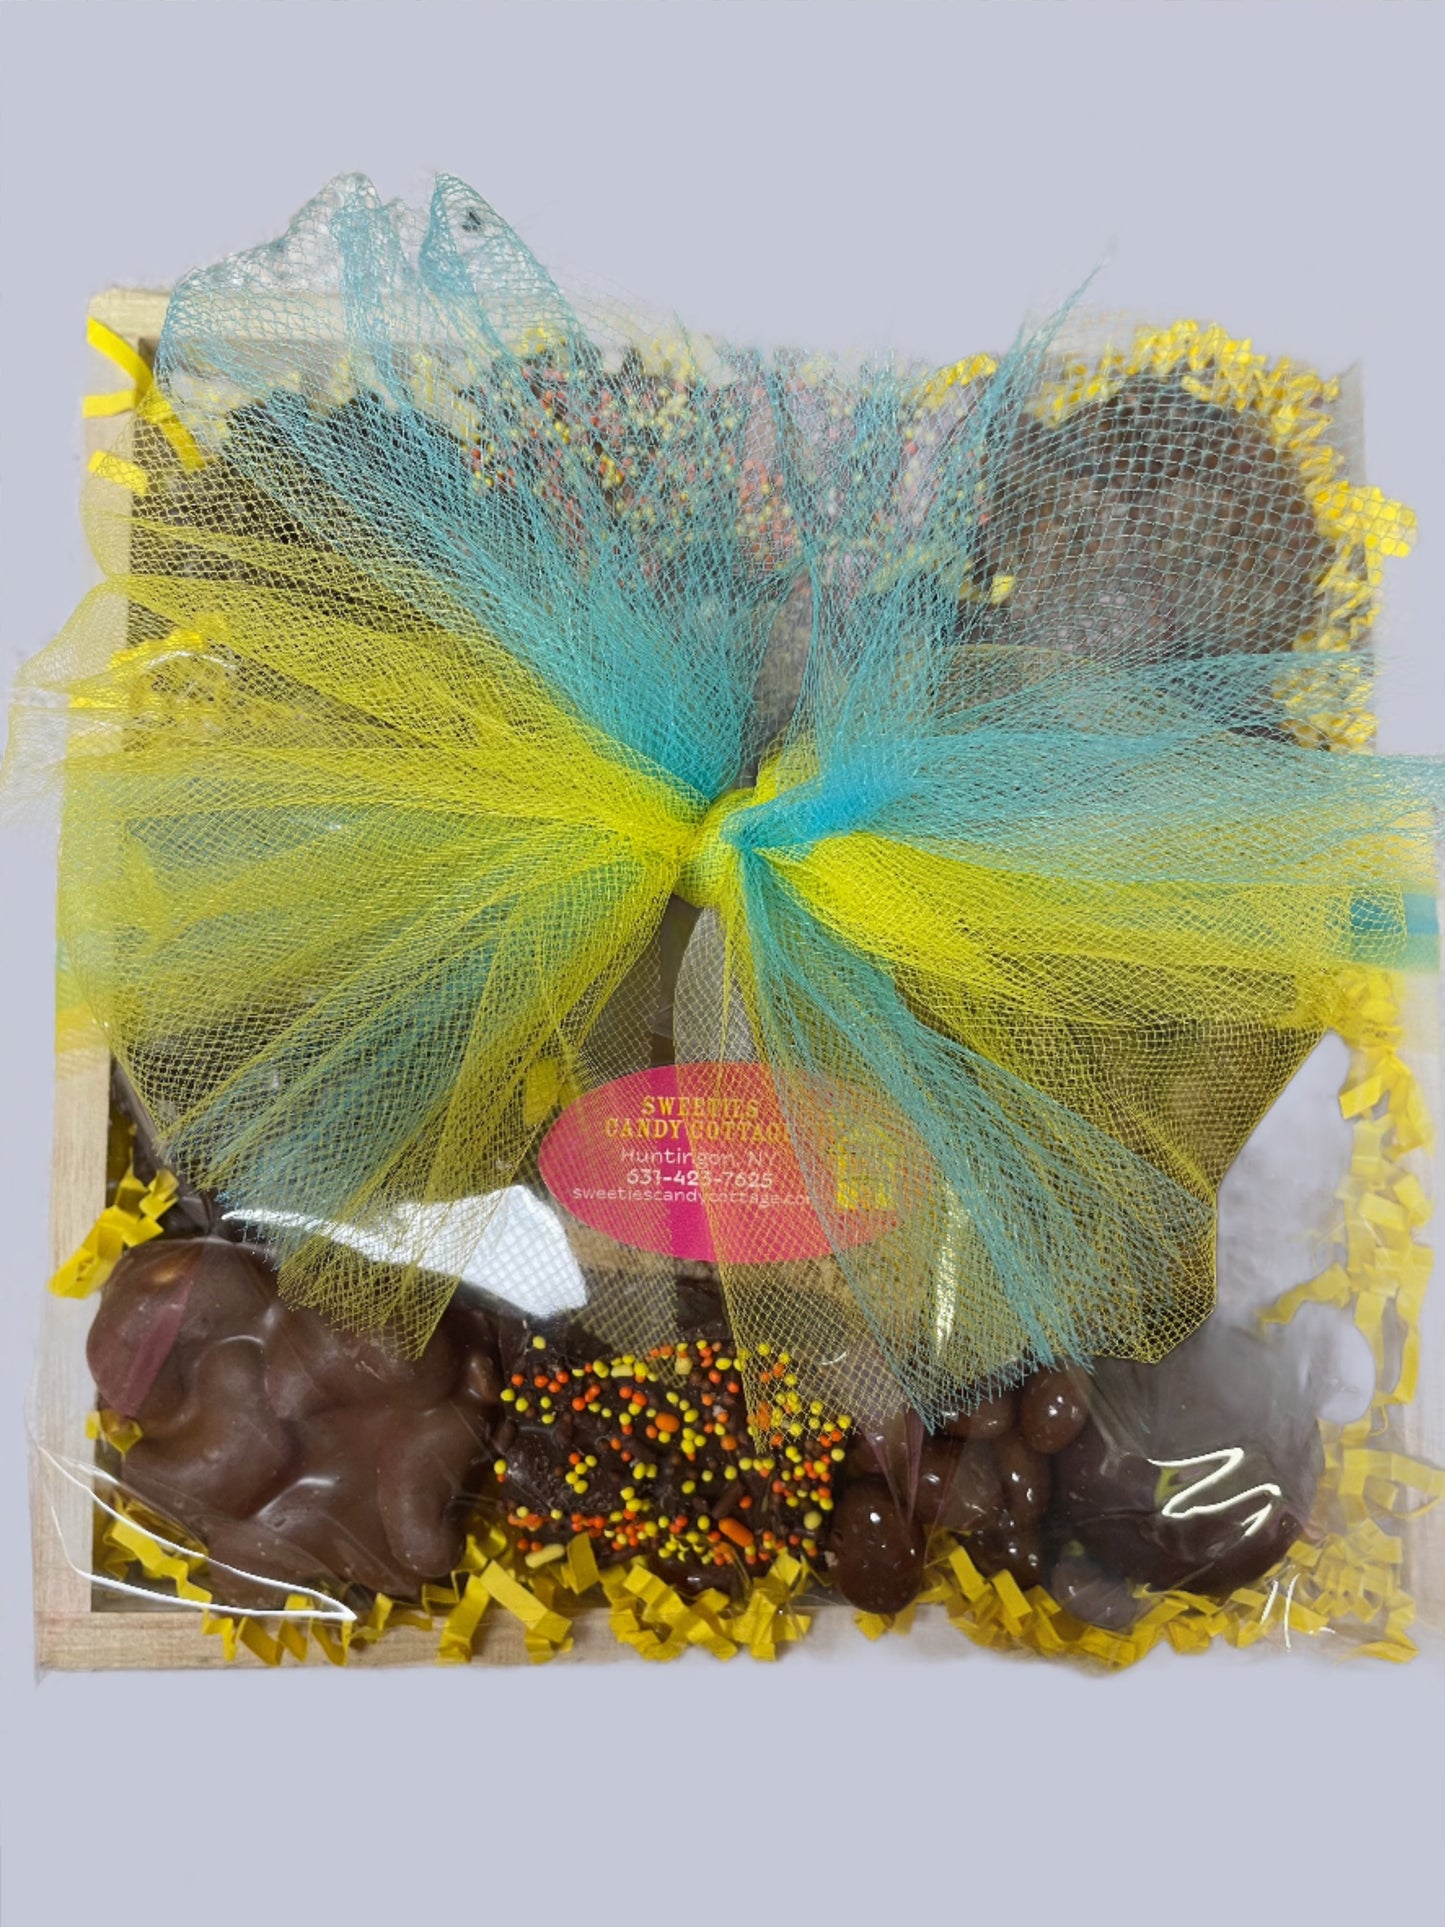 Gourmet Chocolate Tray - extra small  Sweeties Candy Cottage   